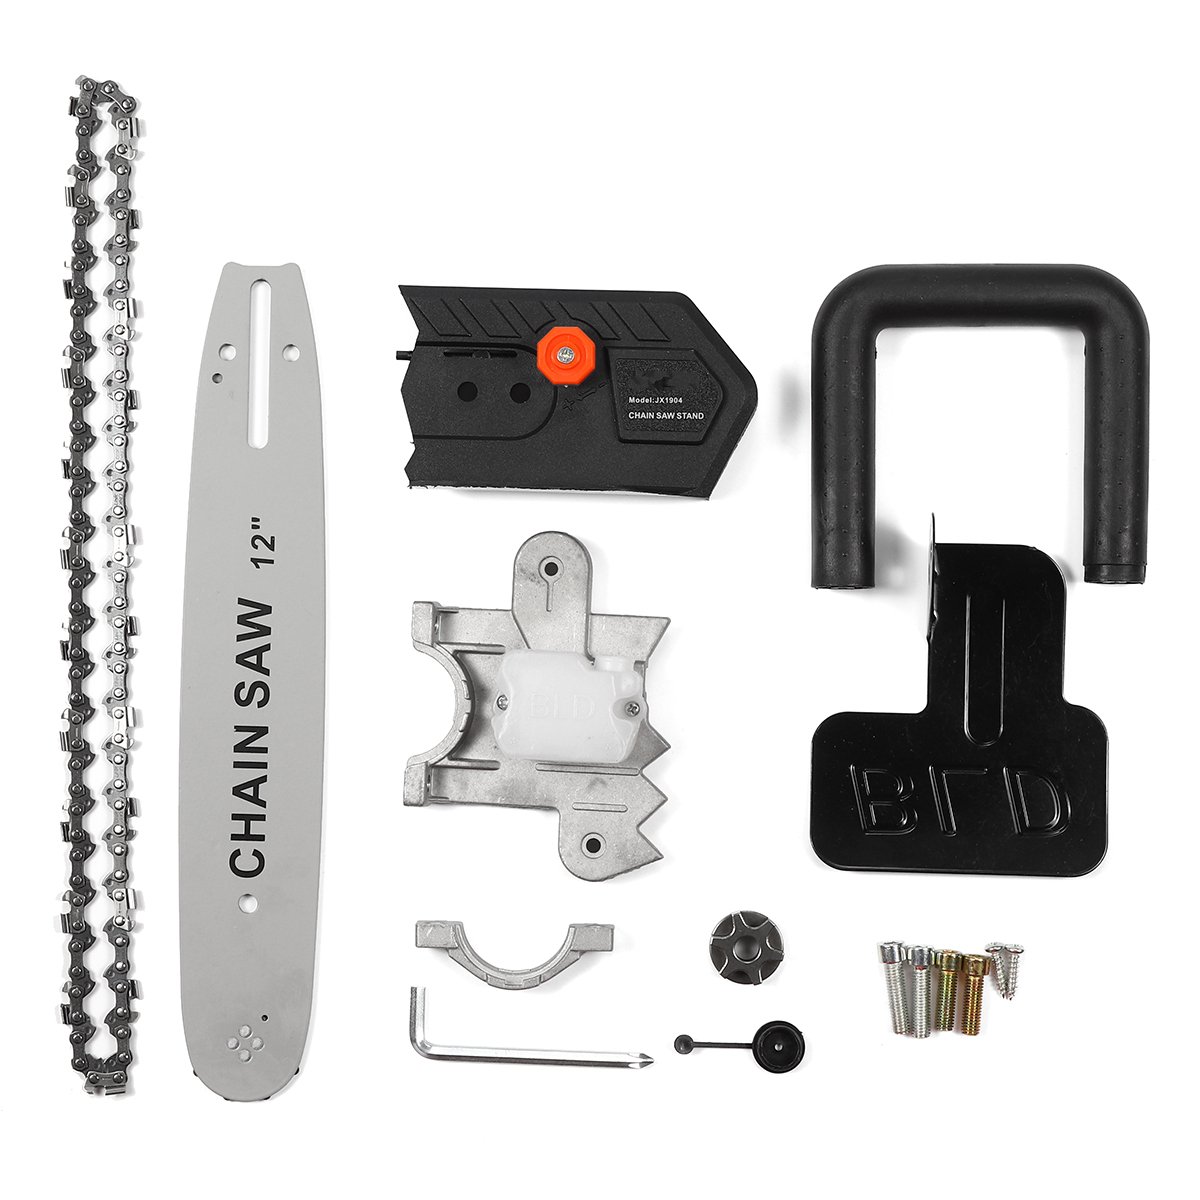 12-Inch-Chainsaw-Bracket-Electric-Chain-Saw-Stand-Set-Part-For-100-Angle-Grinder-1755370-9